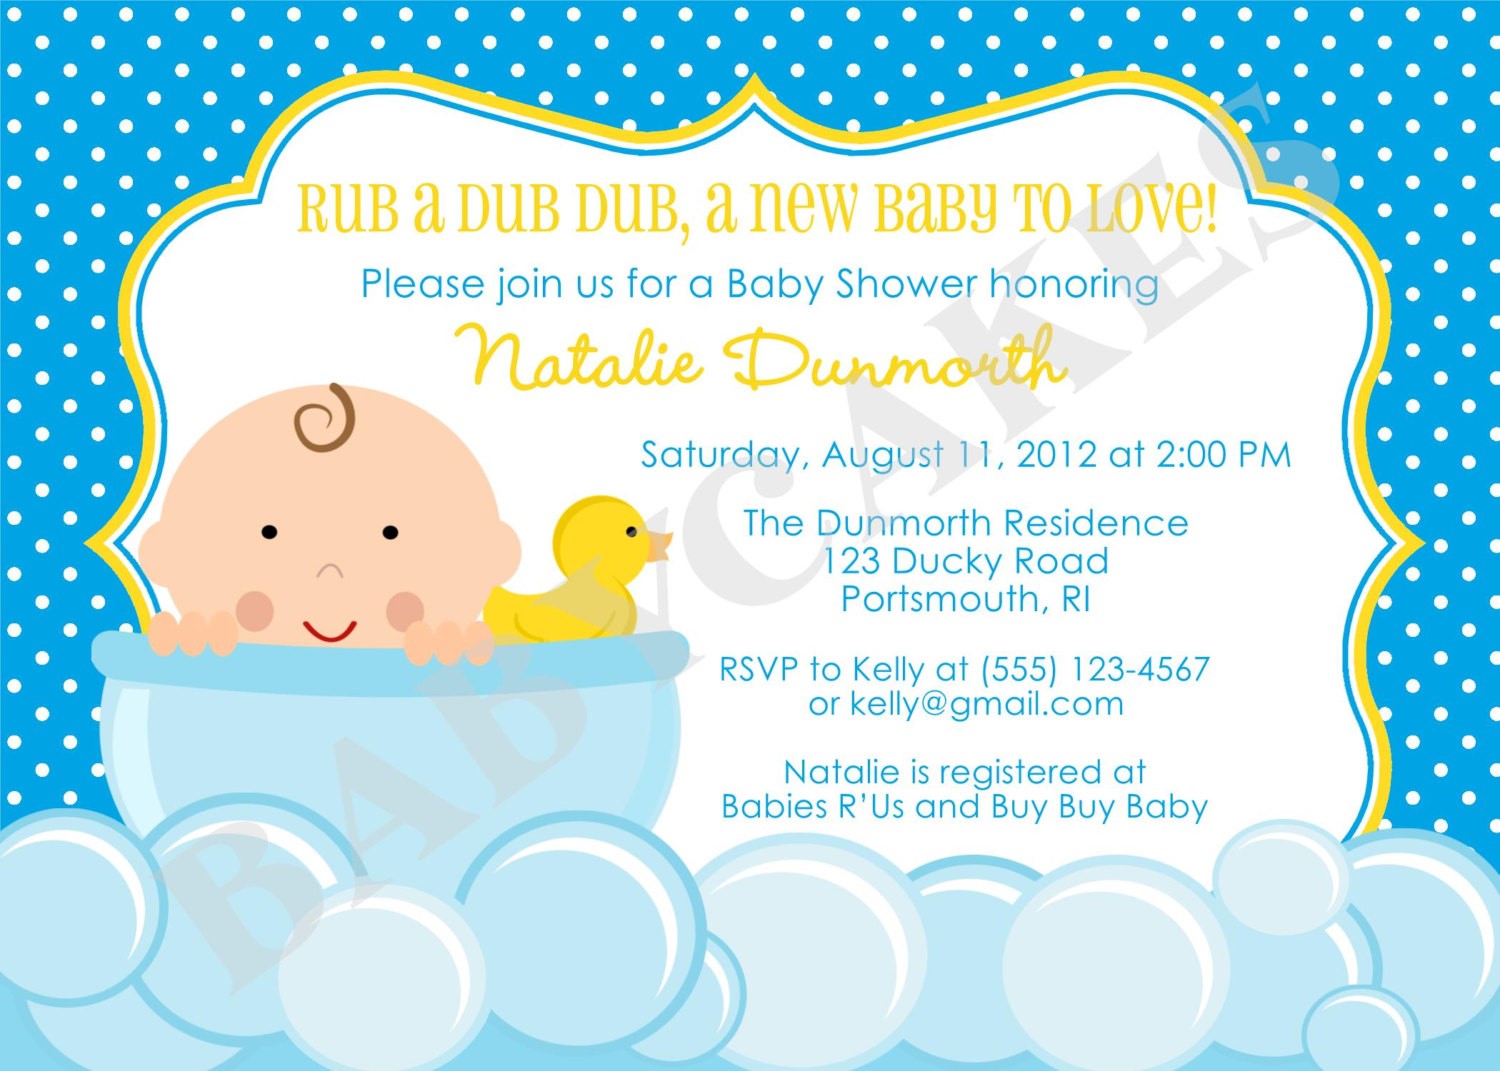 Full Size of Baby Shower:sturdy Baby Shower Invitation Template Image Concepts Baby Shower Invitation Template Invitation For Baby Shower Popular Rubber Duck Baby Shower Invitation For Additional Baby Shower Invitation